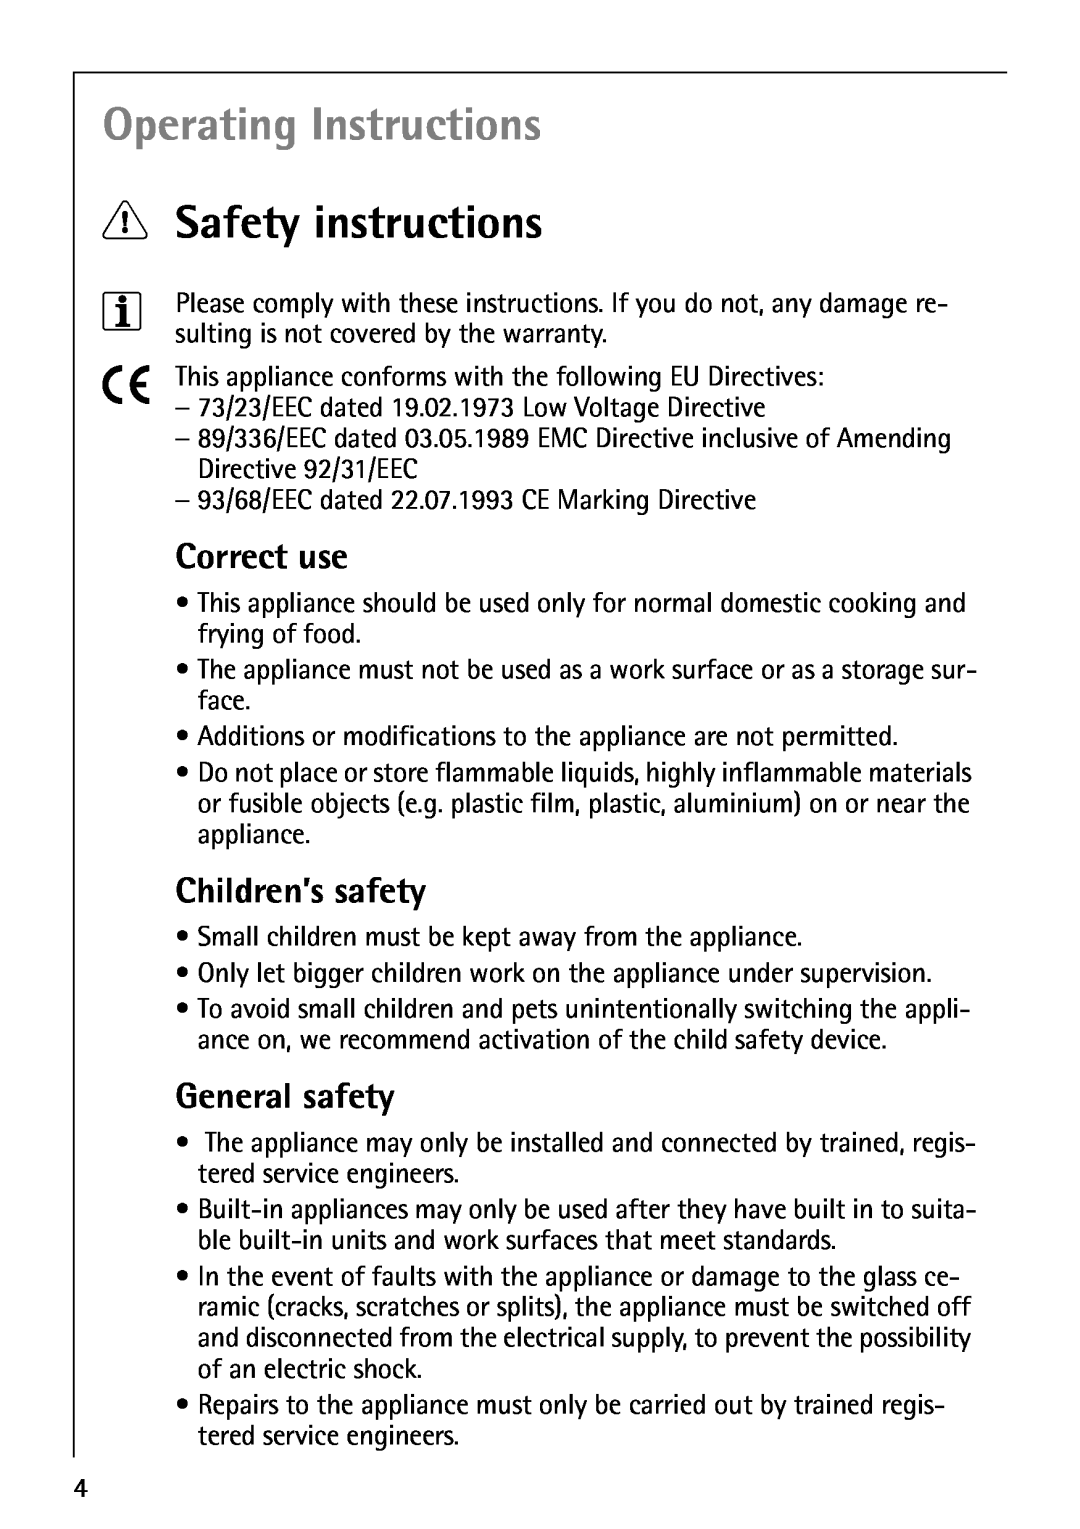 Electrolux 66301K-MN manual Operating Instructions, Safety instructions, Correct use, Children’s safety, General safety 